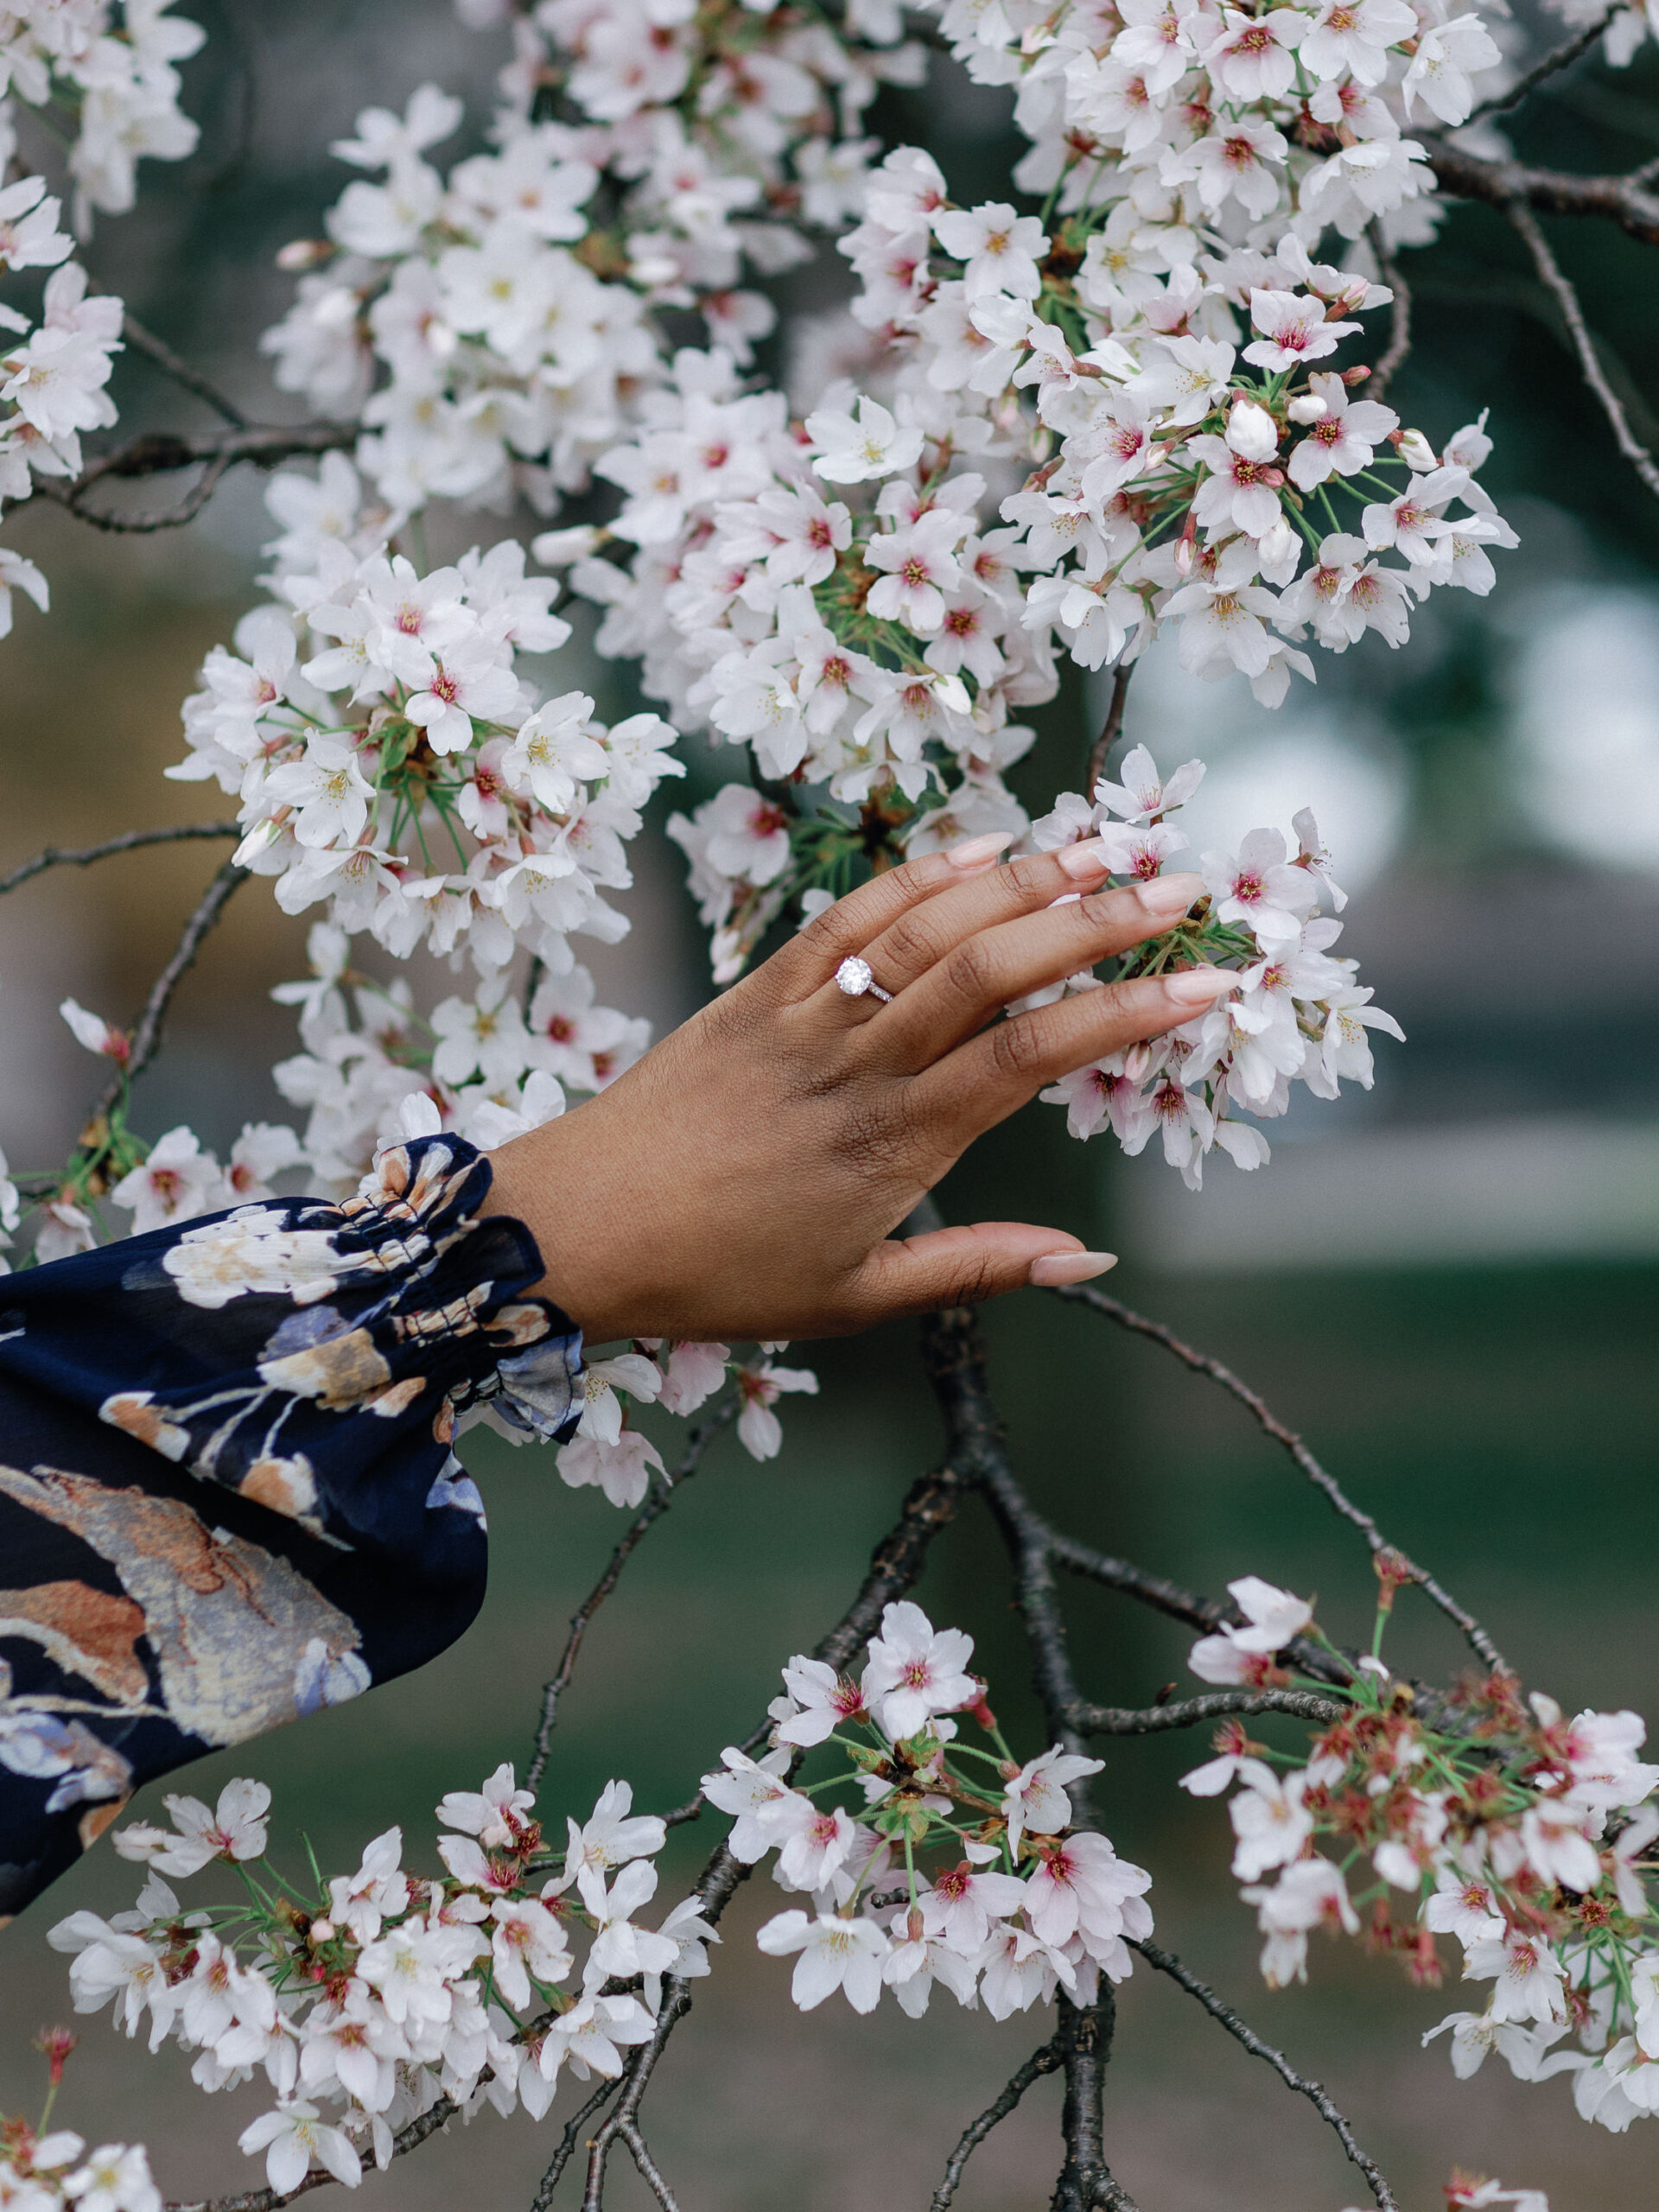 The hand of a newly engaged bride touching the cherry blossom flowers.